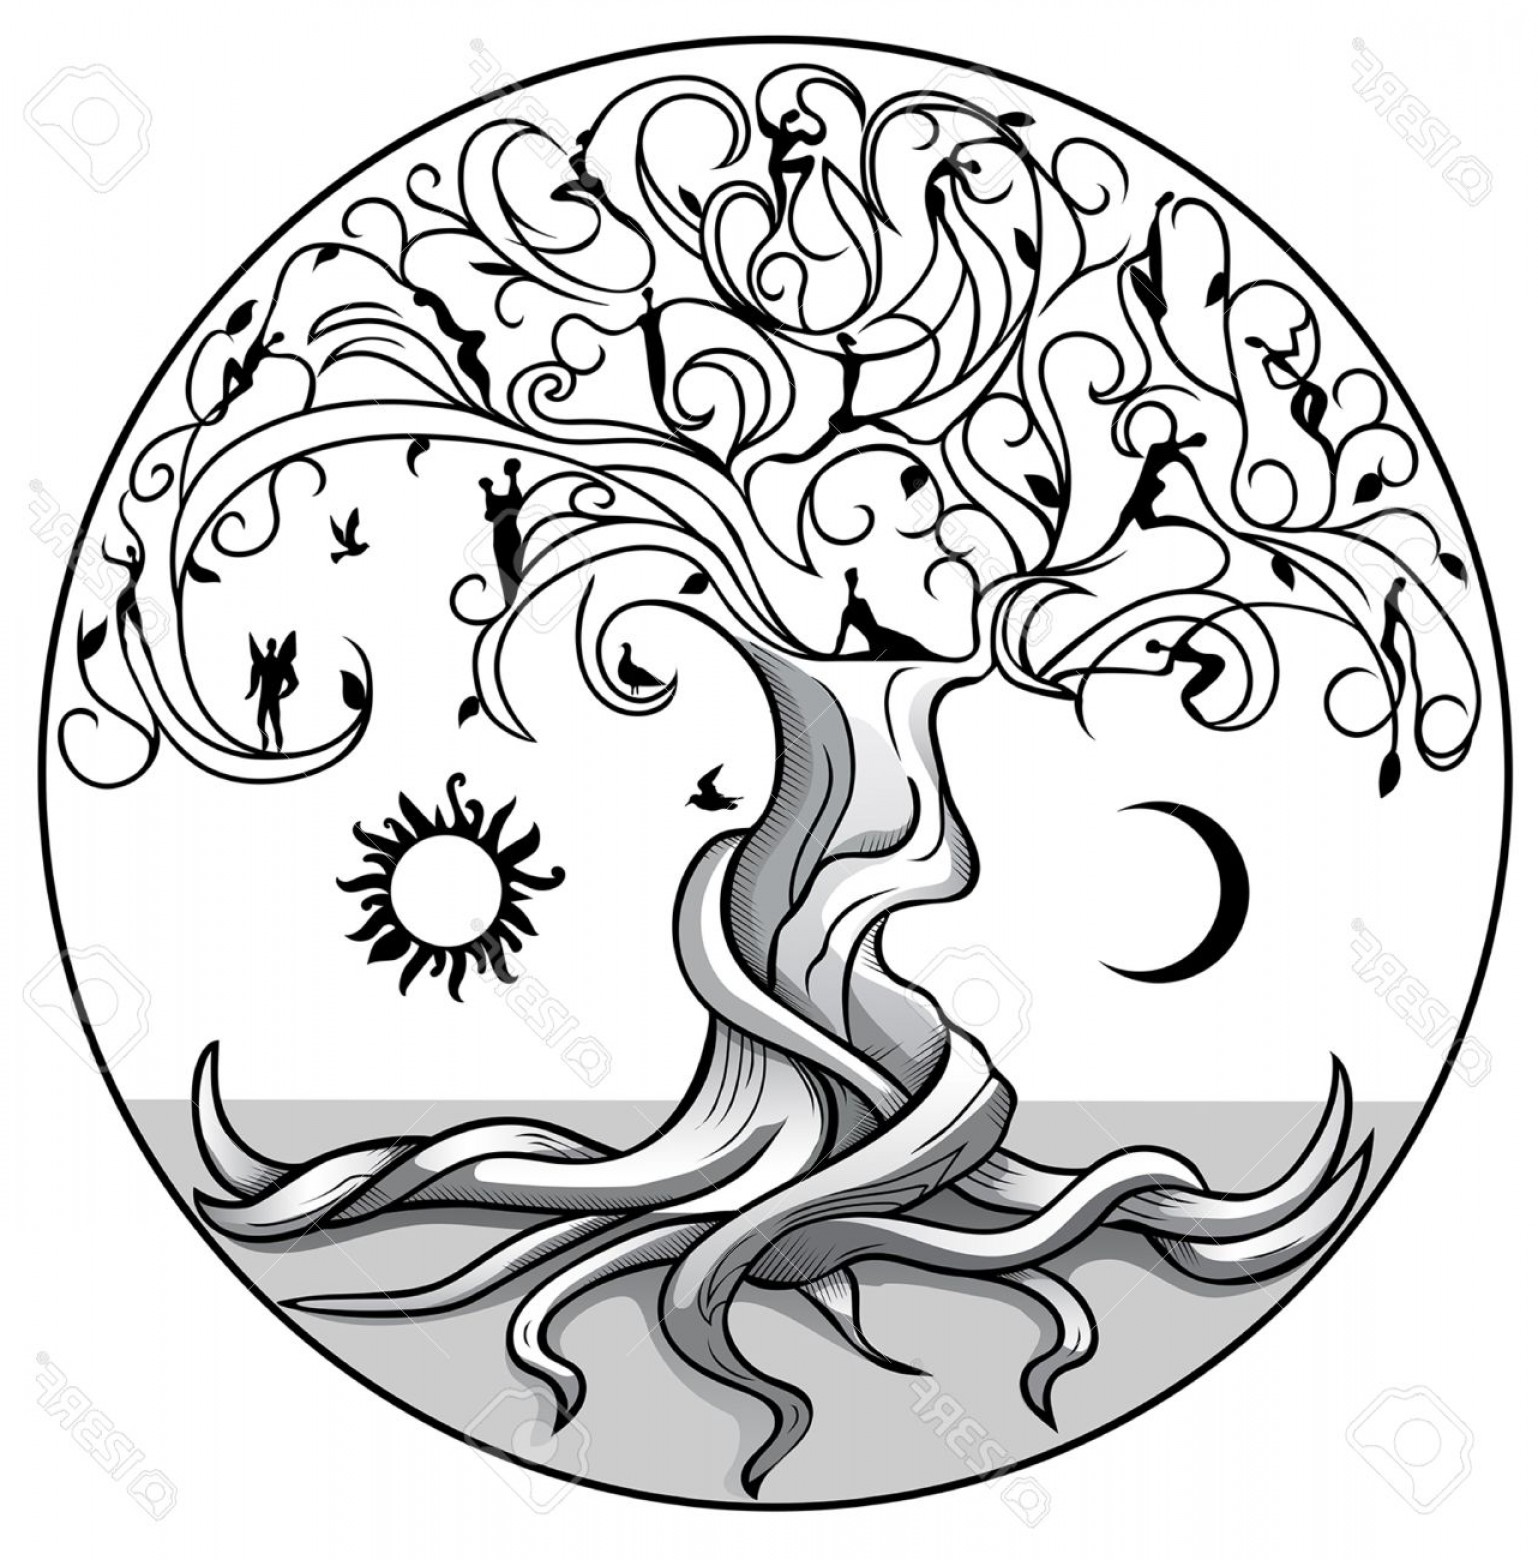 Download Tree Of Life Vector at GetDrawings.com | Free for personal ...